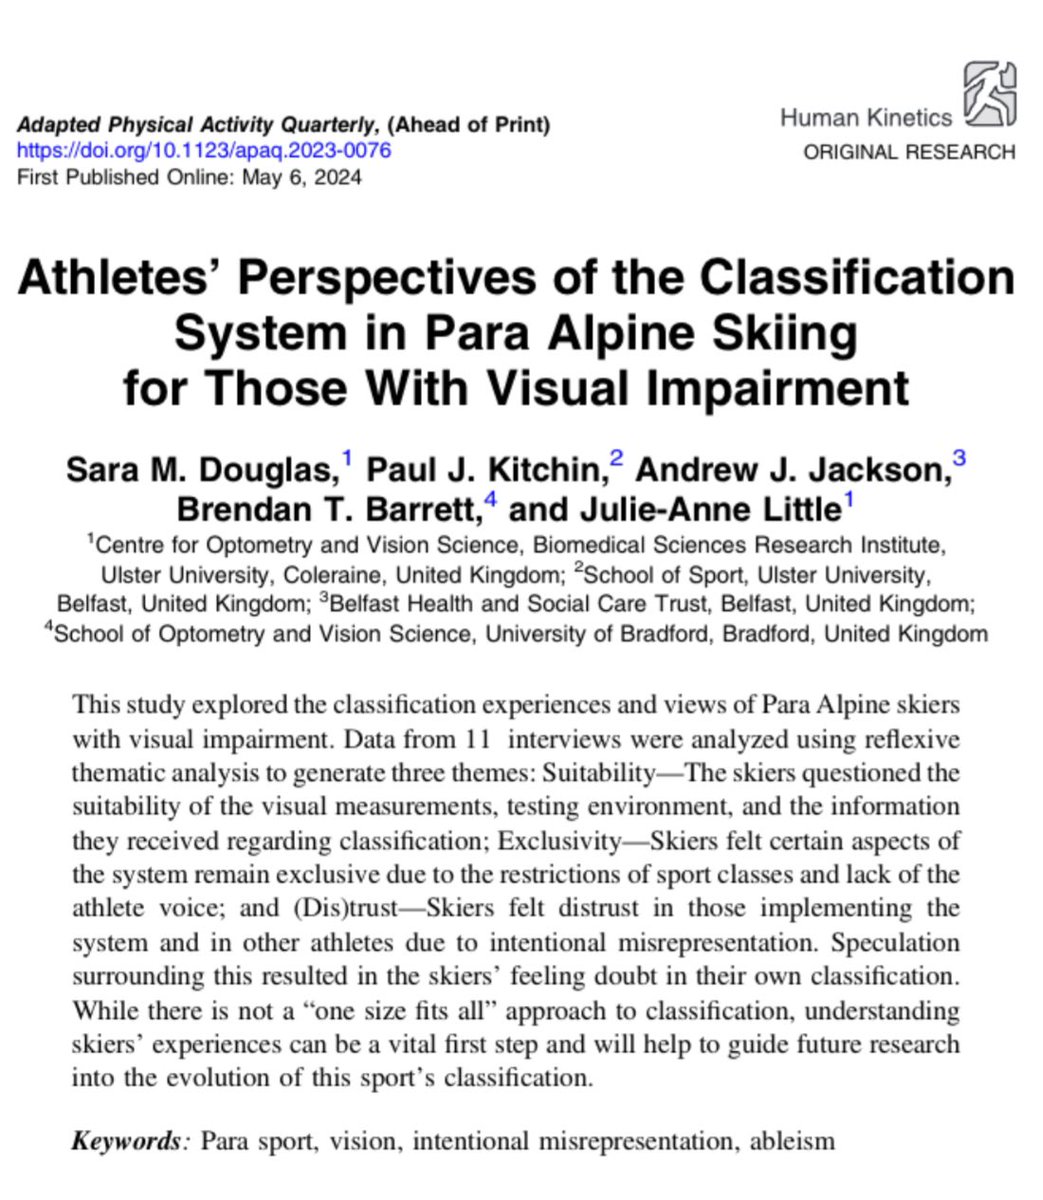 🚨 NEW PUBLICATION 🚨 Congratulations Dr Paul Kitchin & collaborators on their publication examining athletes’ perspectives of the classification system in para alpine skiing for those with visual impairment 👏👏⛷️⛷️ #ParaSport OPEN ACCESS 👉 journals.humankinetics.com/view/journals/…